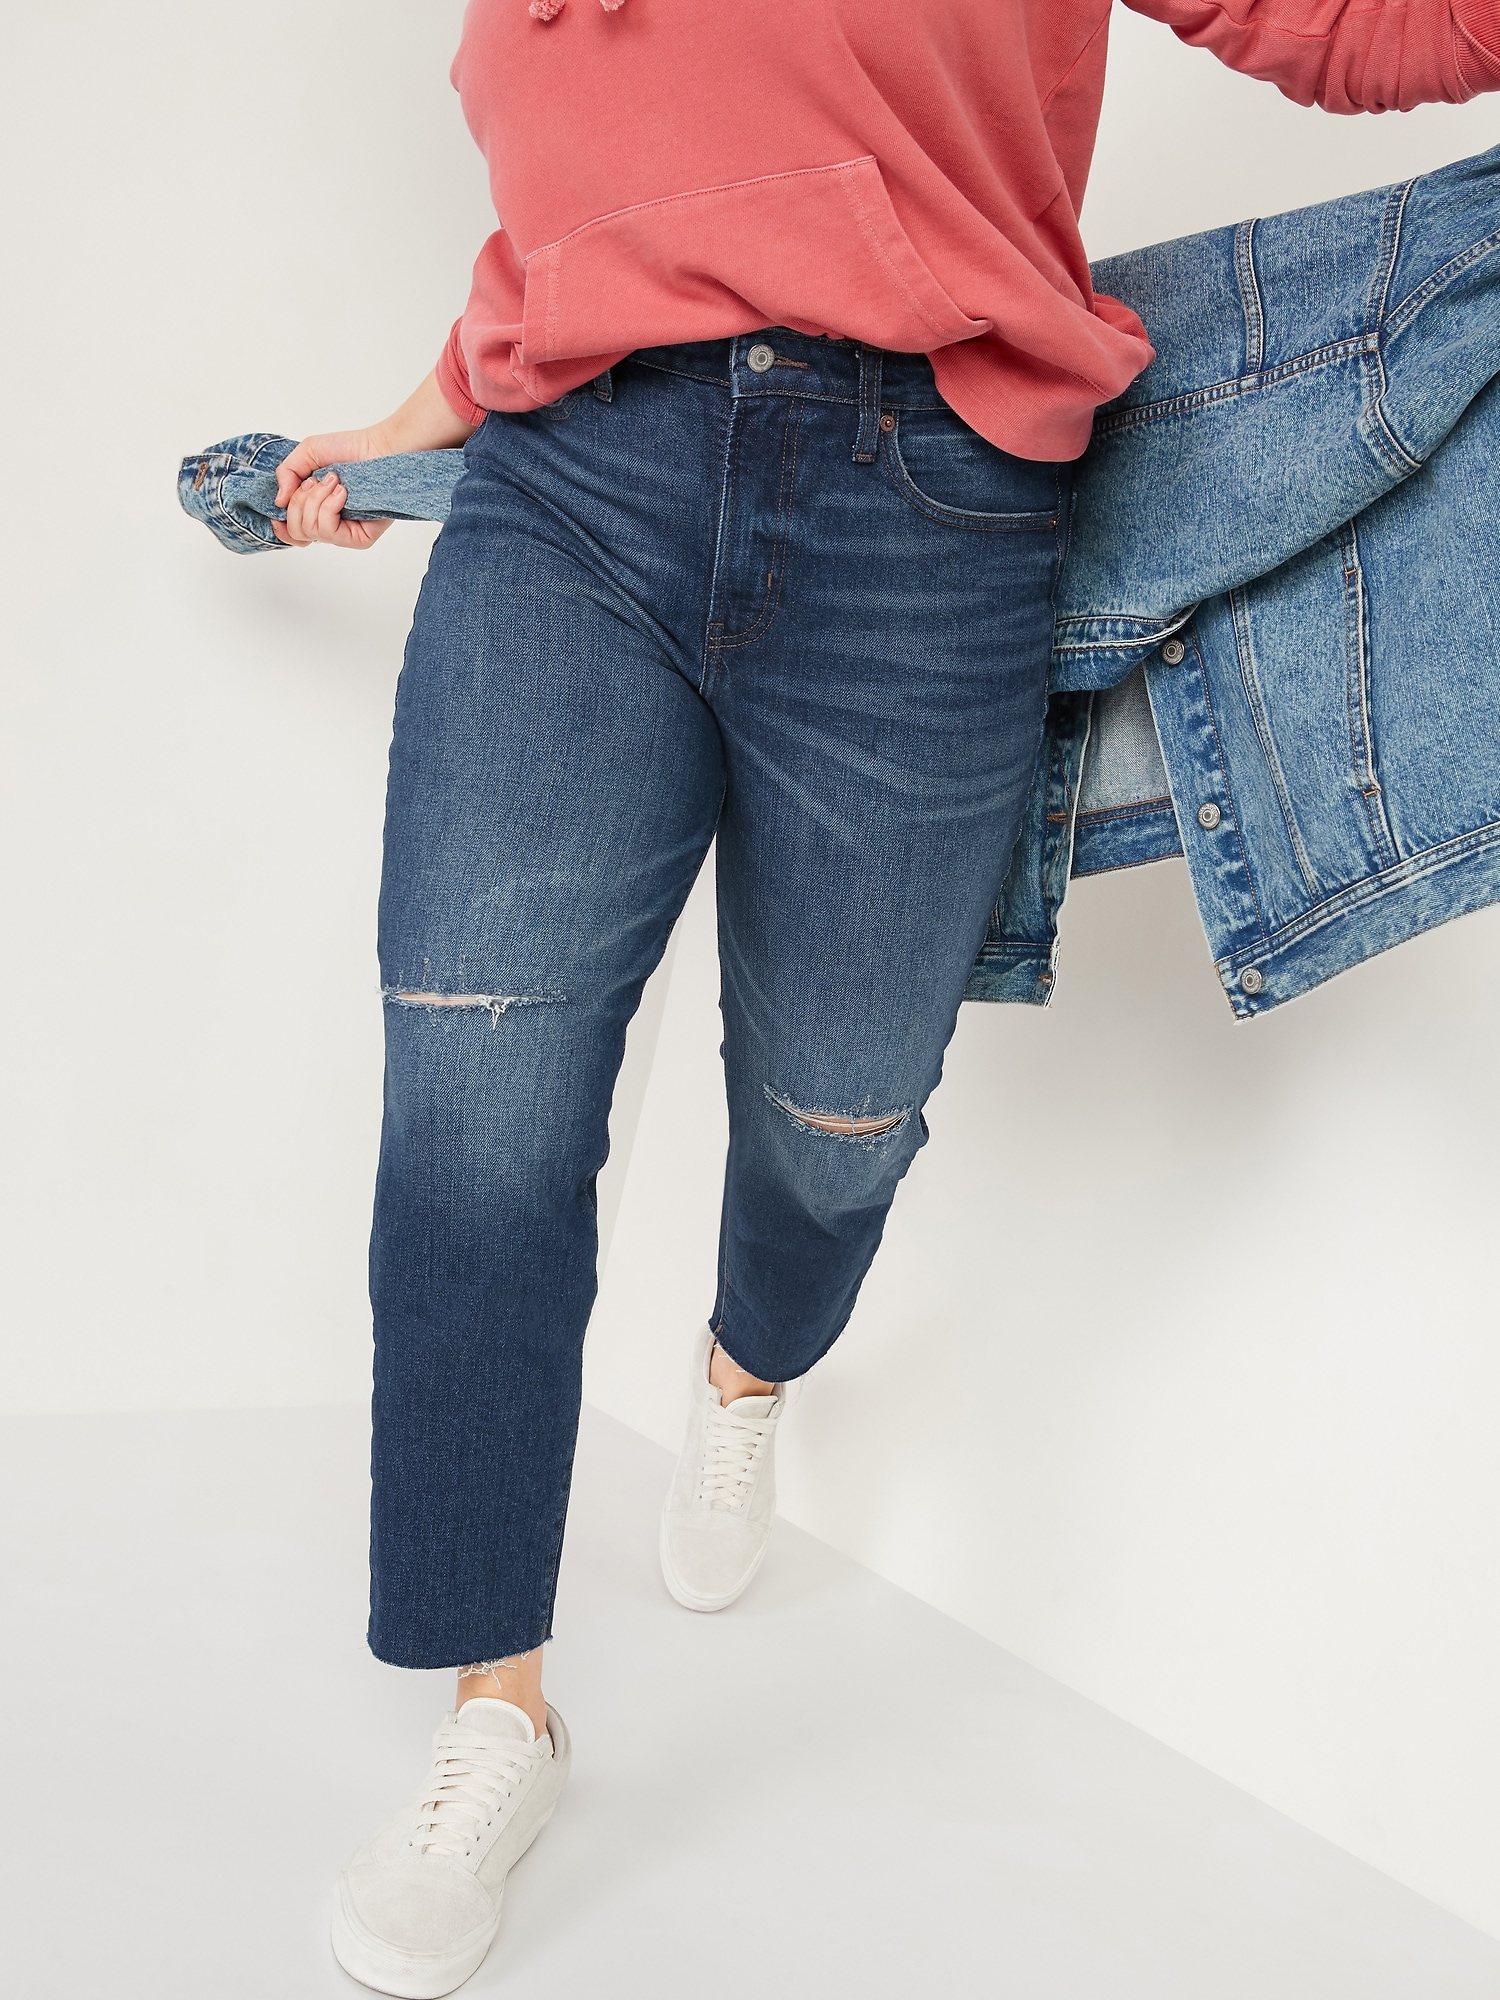 High-Waisted O.G. Straight Ripped Cut-Off Jeans for Women